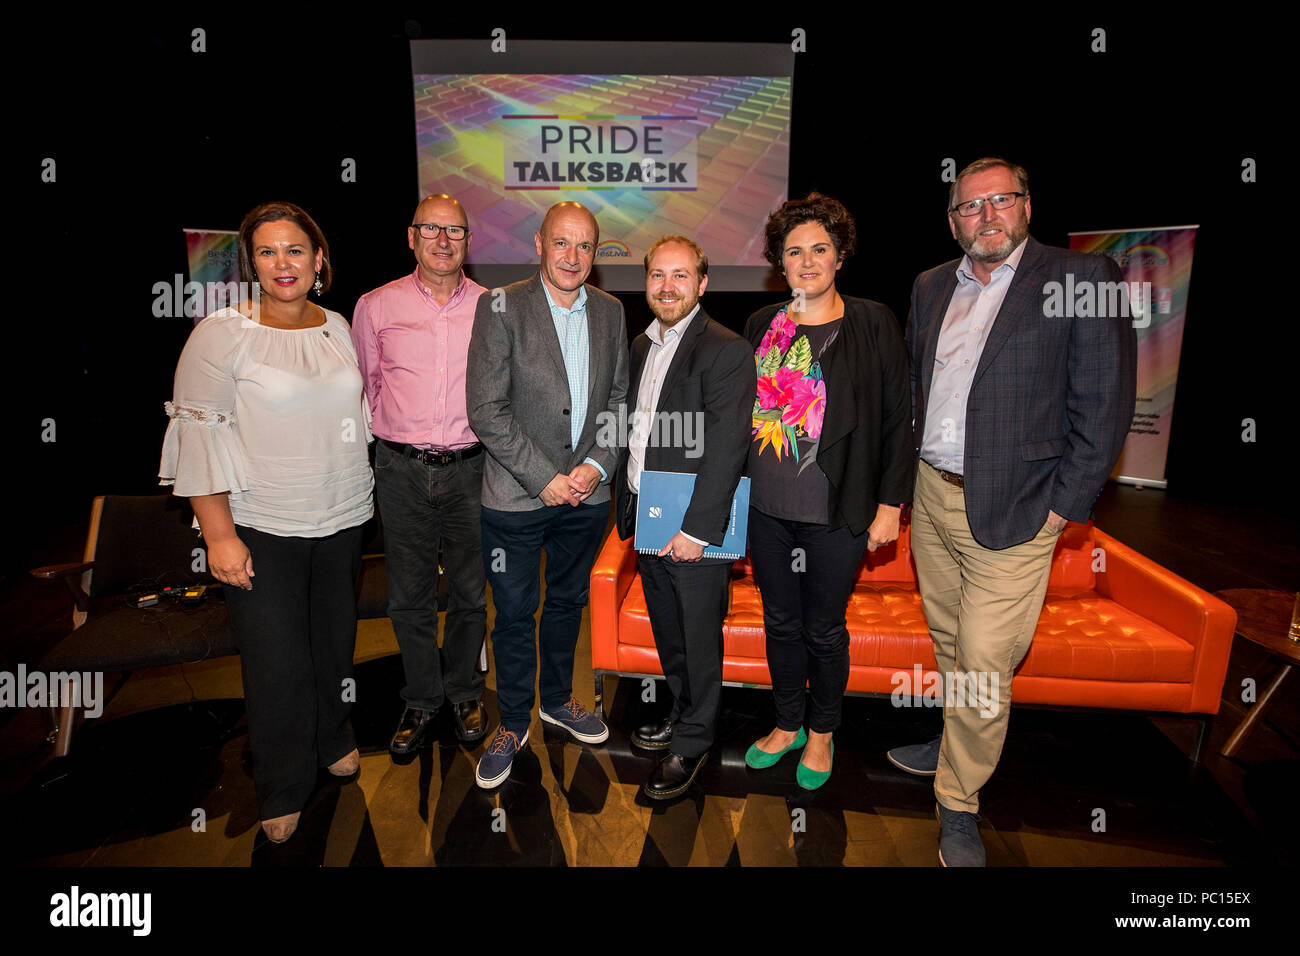 (left to right) Sinn Fein President Mary Lou McDonald, leader of the PUP Billy Hutchinson, Alliance MLA John Blair, Green Party NI leader Steven Agnew, SDLP MLA Claire Hanna, and UUP MLA Doug Beatie pose after the Belfast Pride political debate at The Mac Theatre in Belfast to address a wide range of equality issues in Northern Ireland at part of the 2018 Belfast Pride Festival. Stock Photo